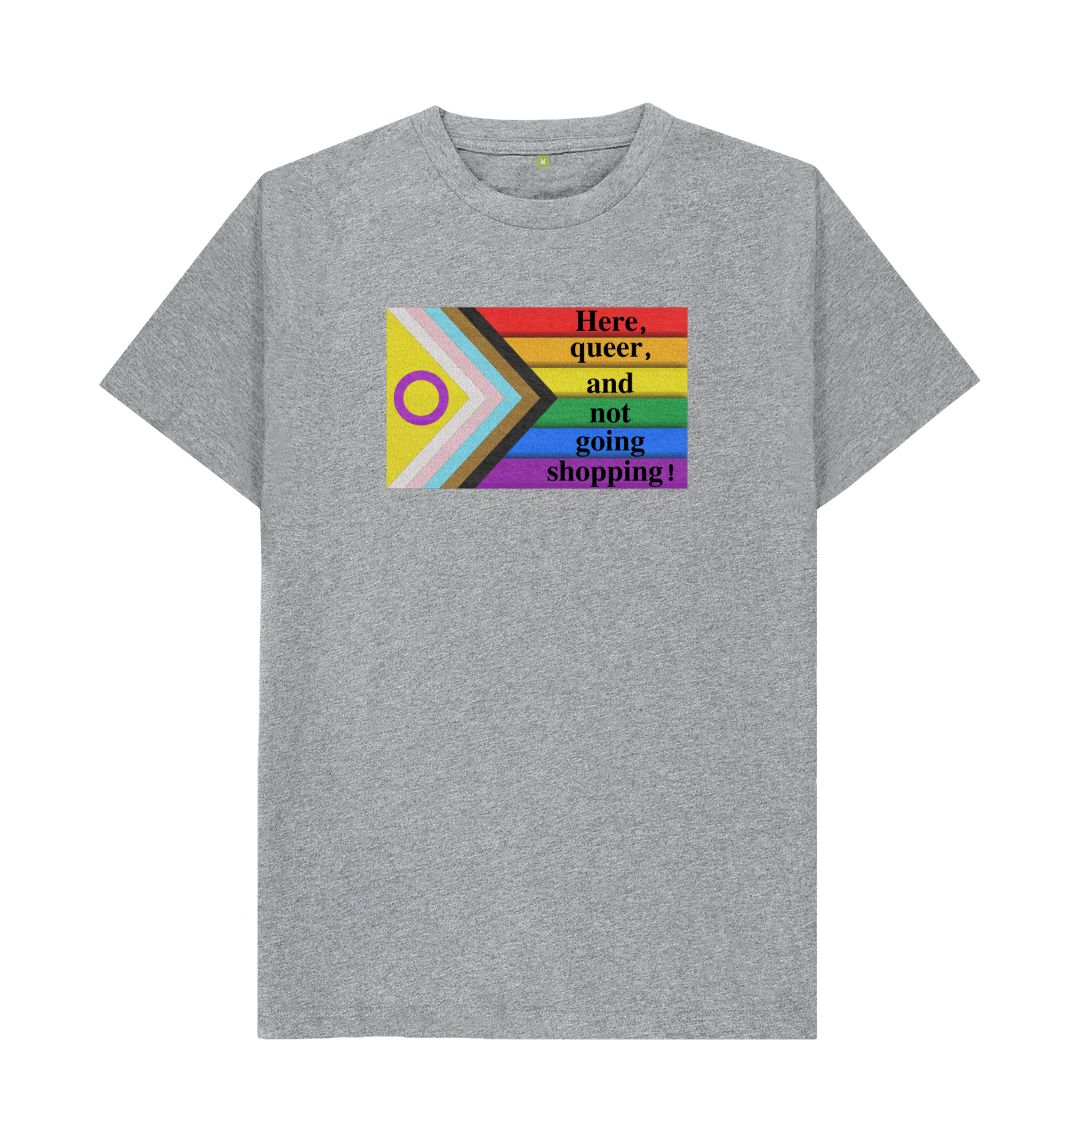 Athletic Grey Here, queer and not going shopping unisex T-shirt